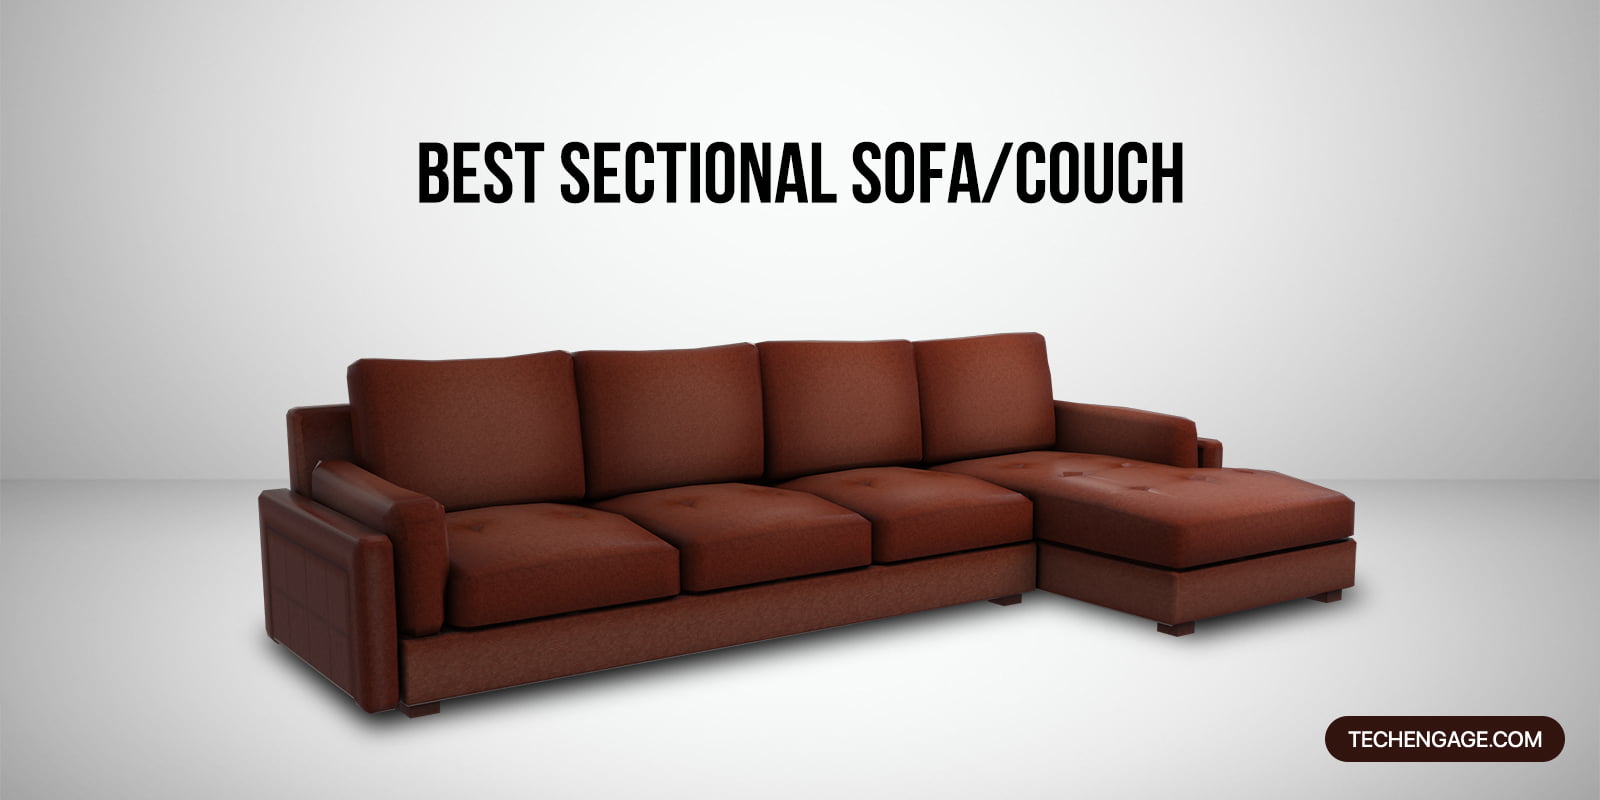 Best Sectional SofaCouch on Amazon